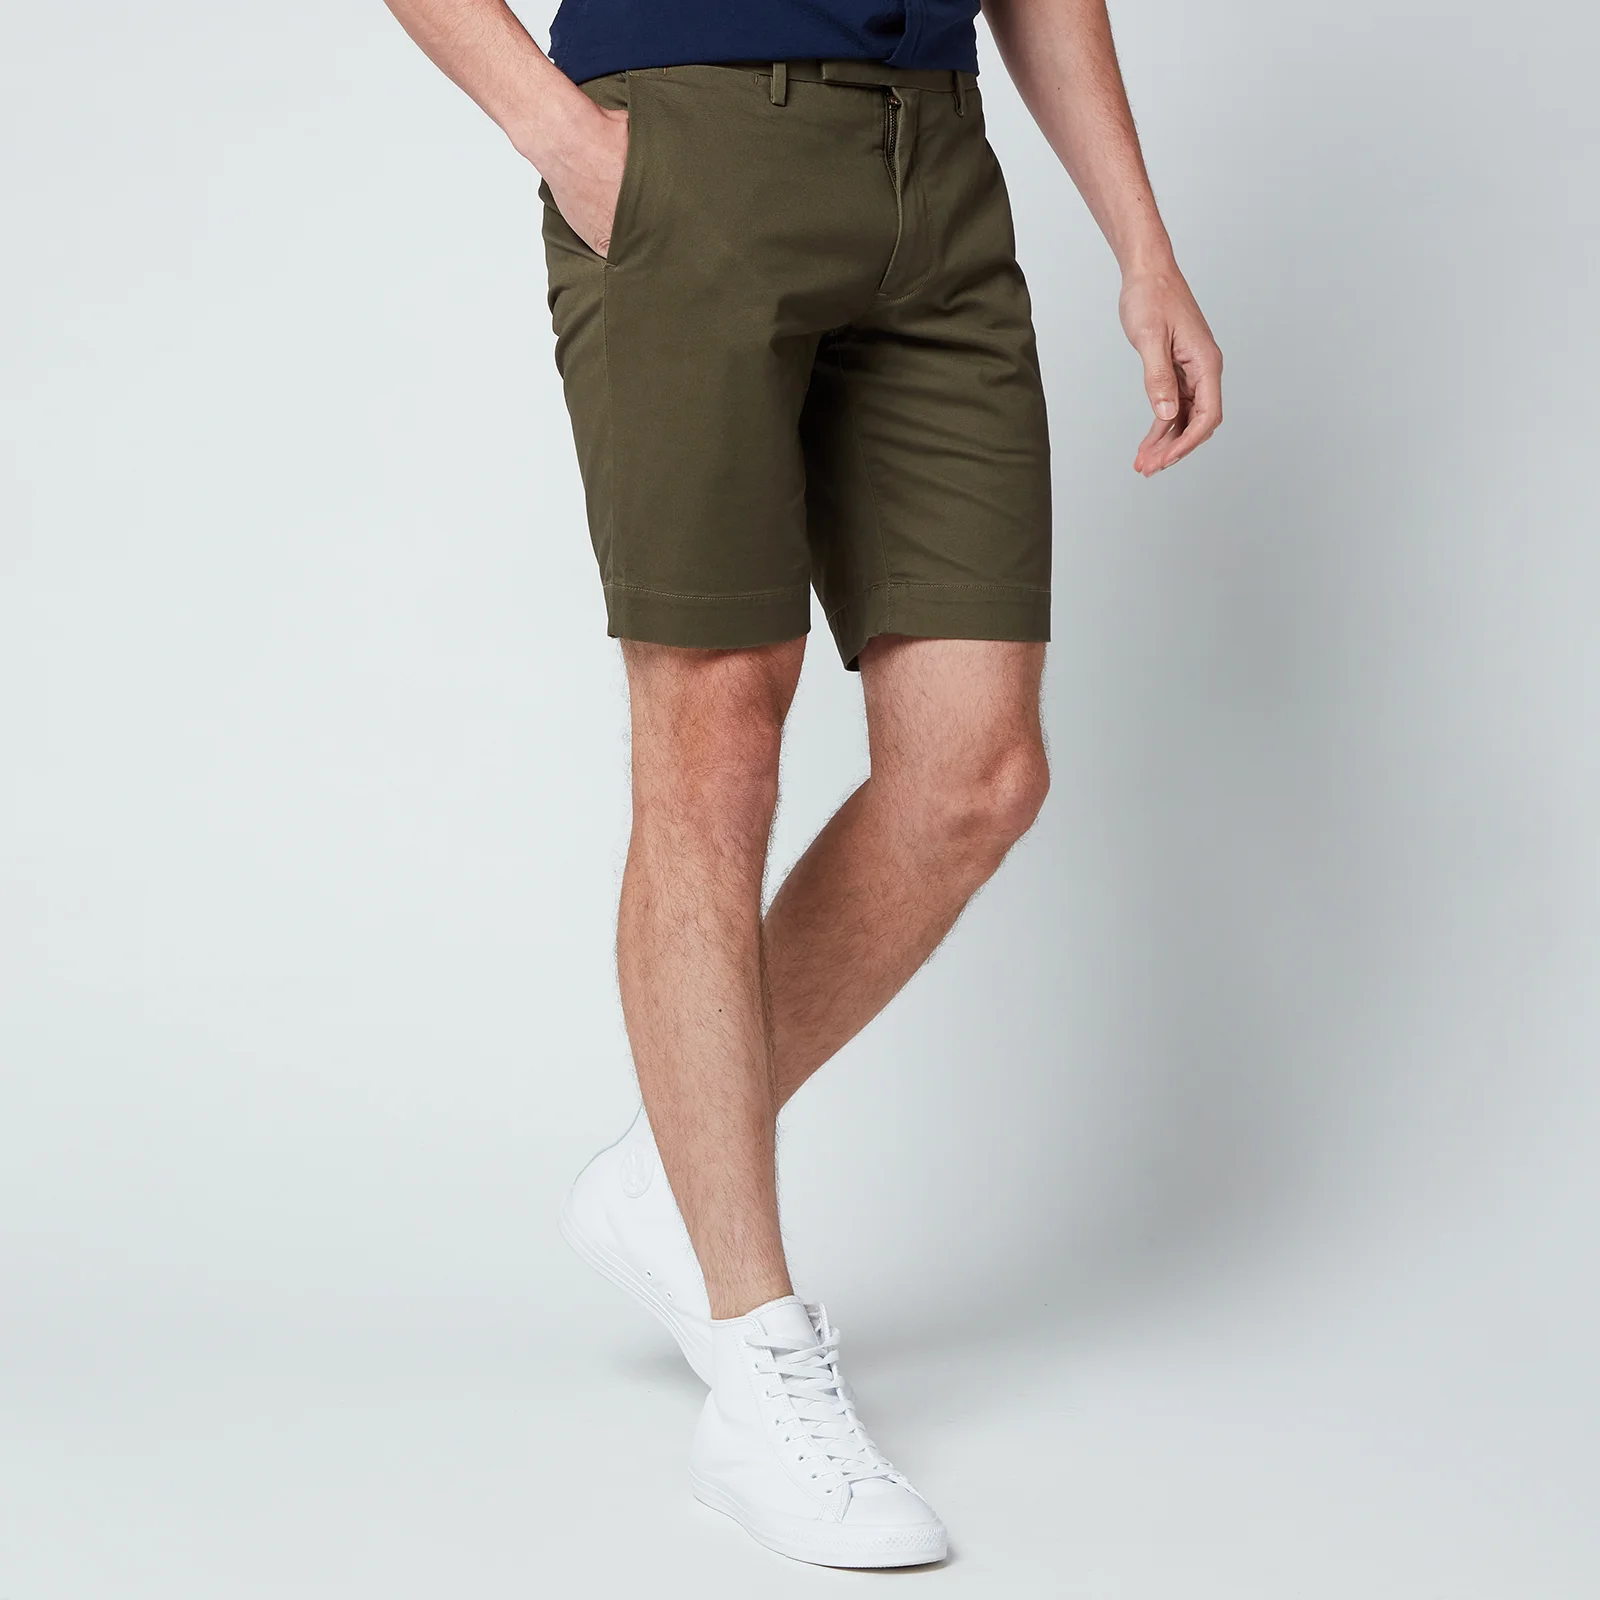 Polo Ralph Lauren Men's Stretch Twill Shorts - Expedition Olive Image 1